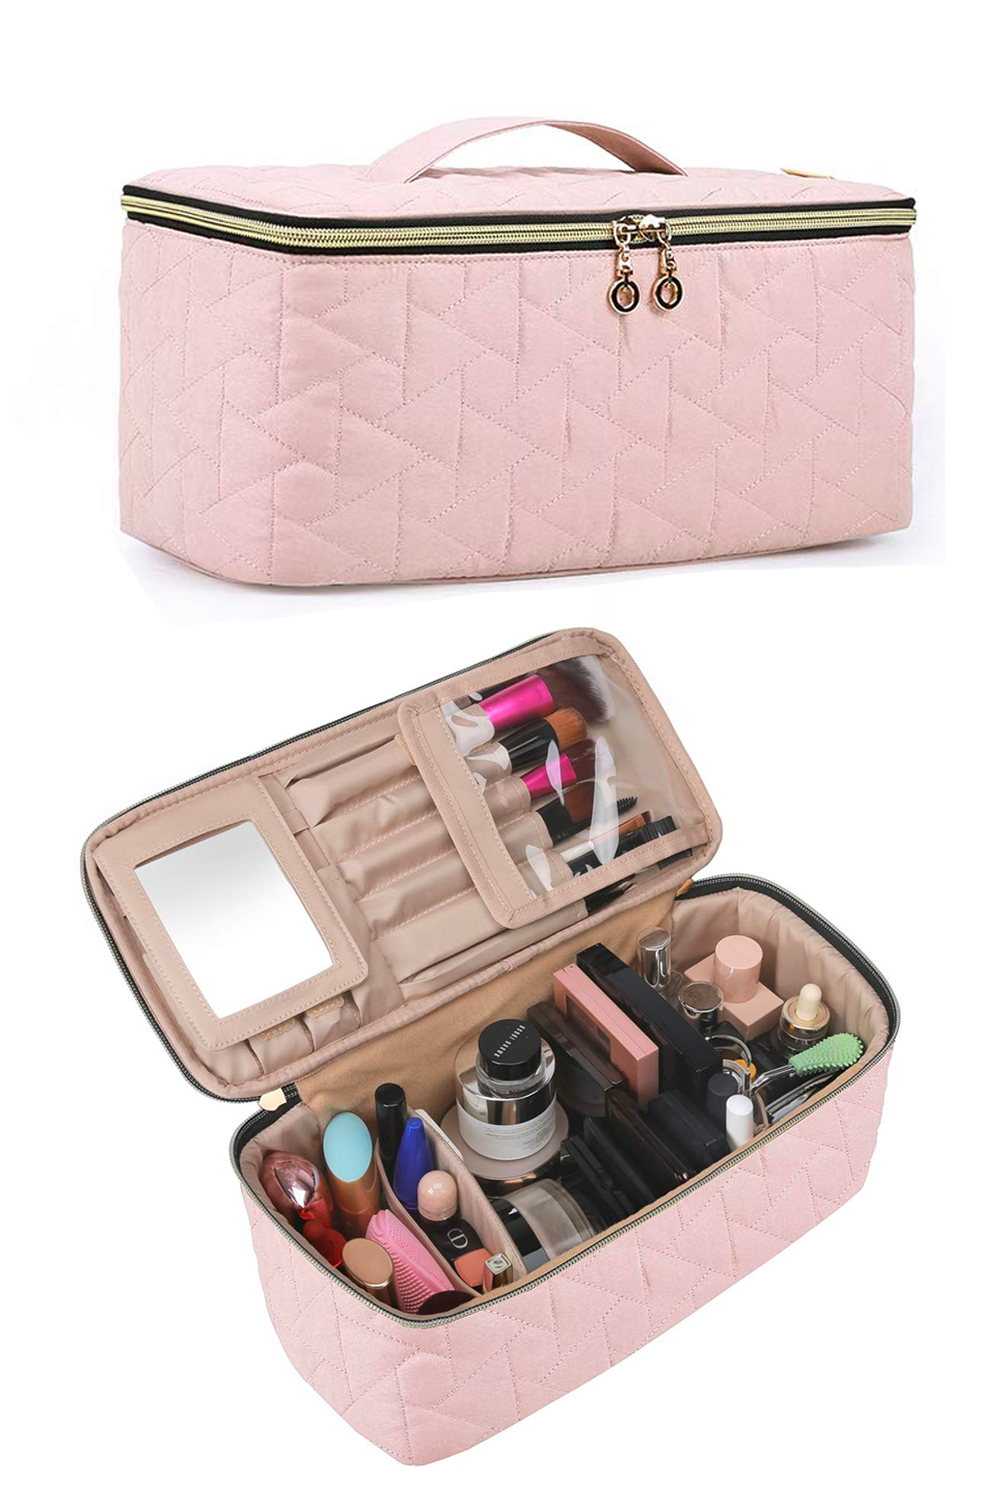 makeup bags for your purse